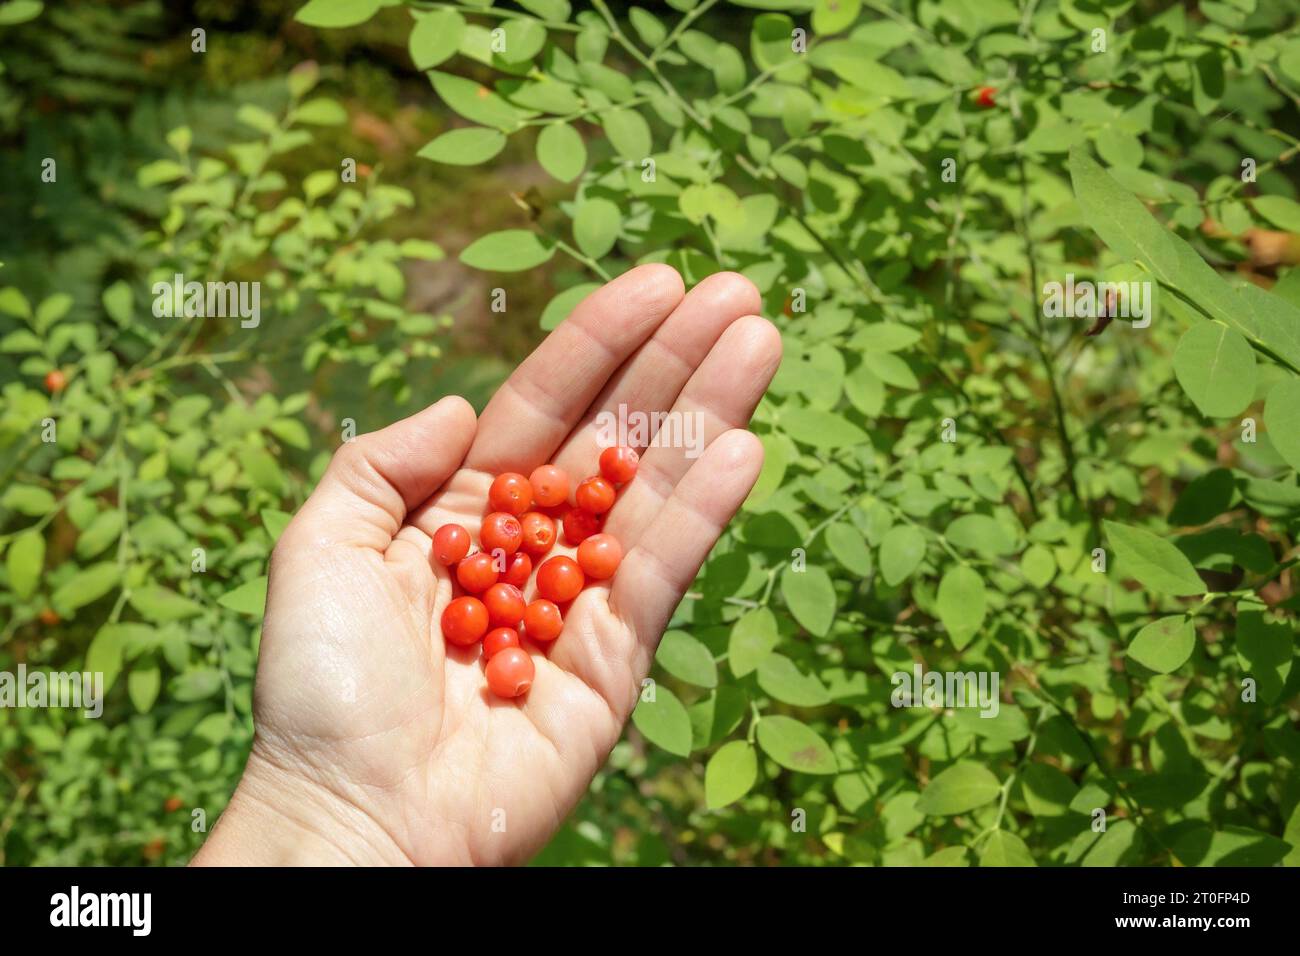 Red Huckleberry in hand in front of defocused Huckleberry plant. Wild Huckleberry harvest in female hand. Forest fruit berry picking while trail hikin Stock Photo